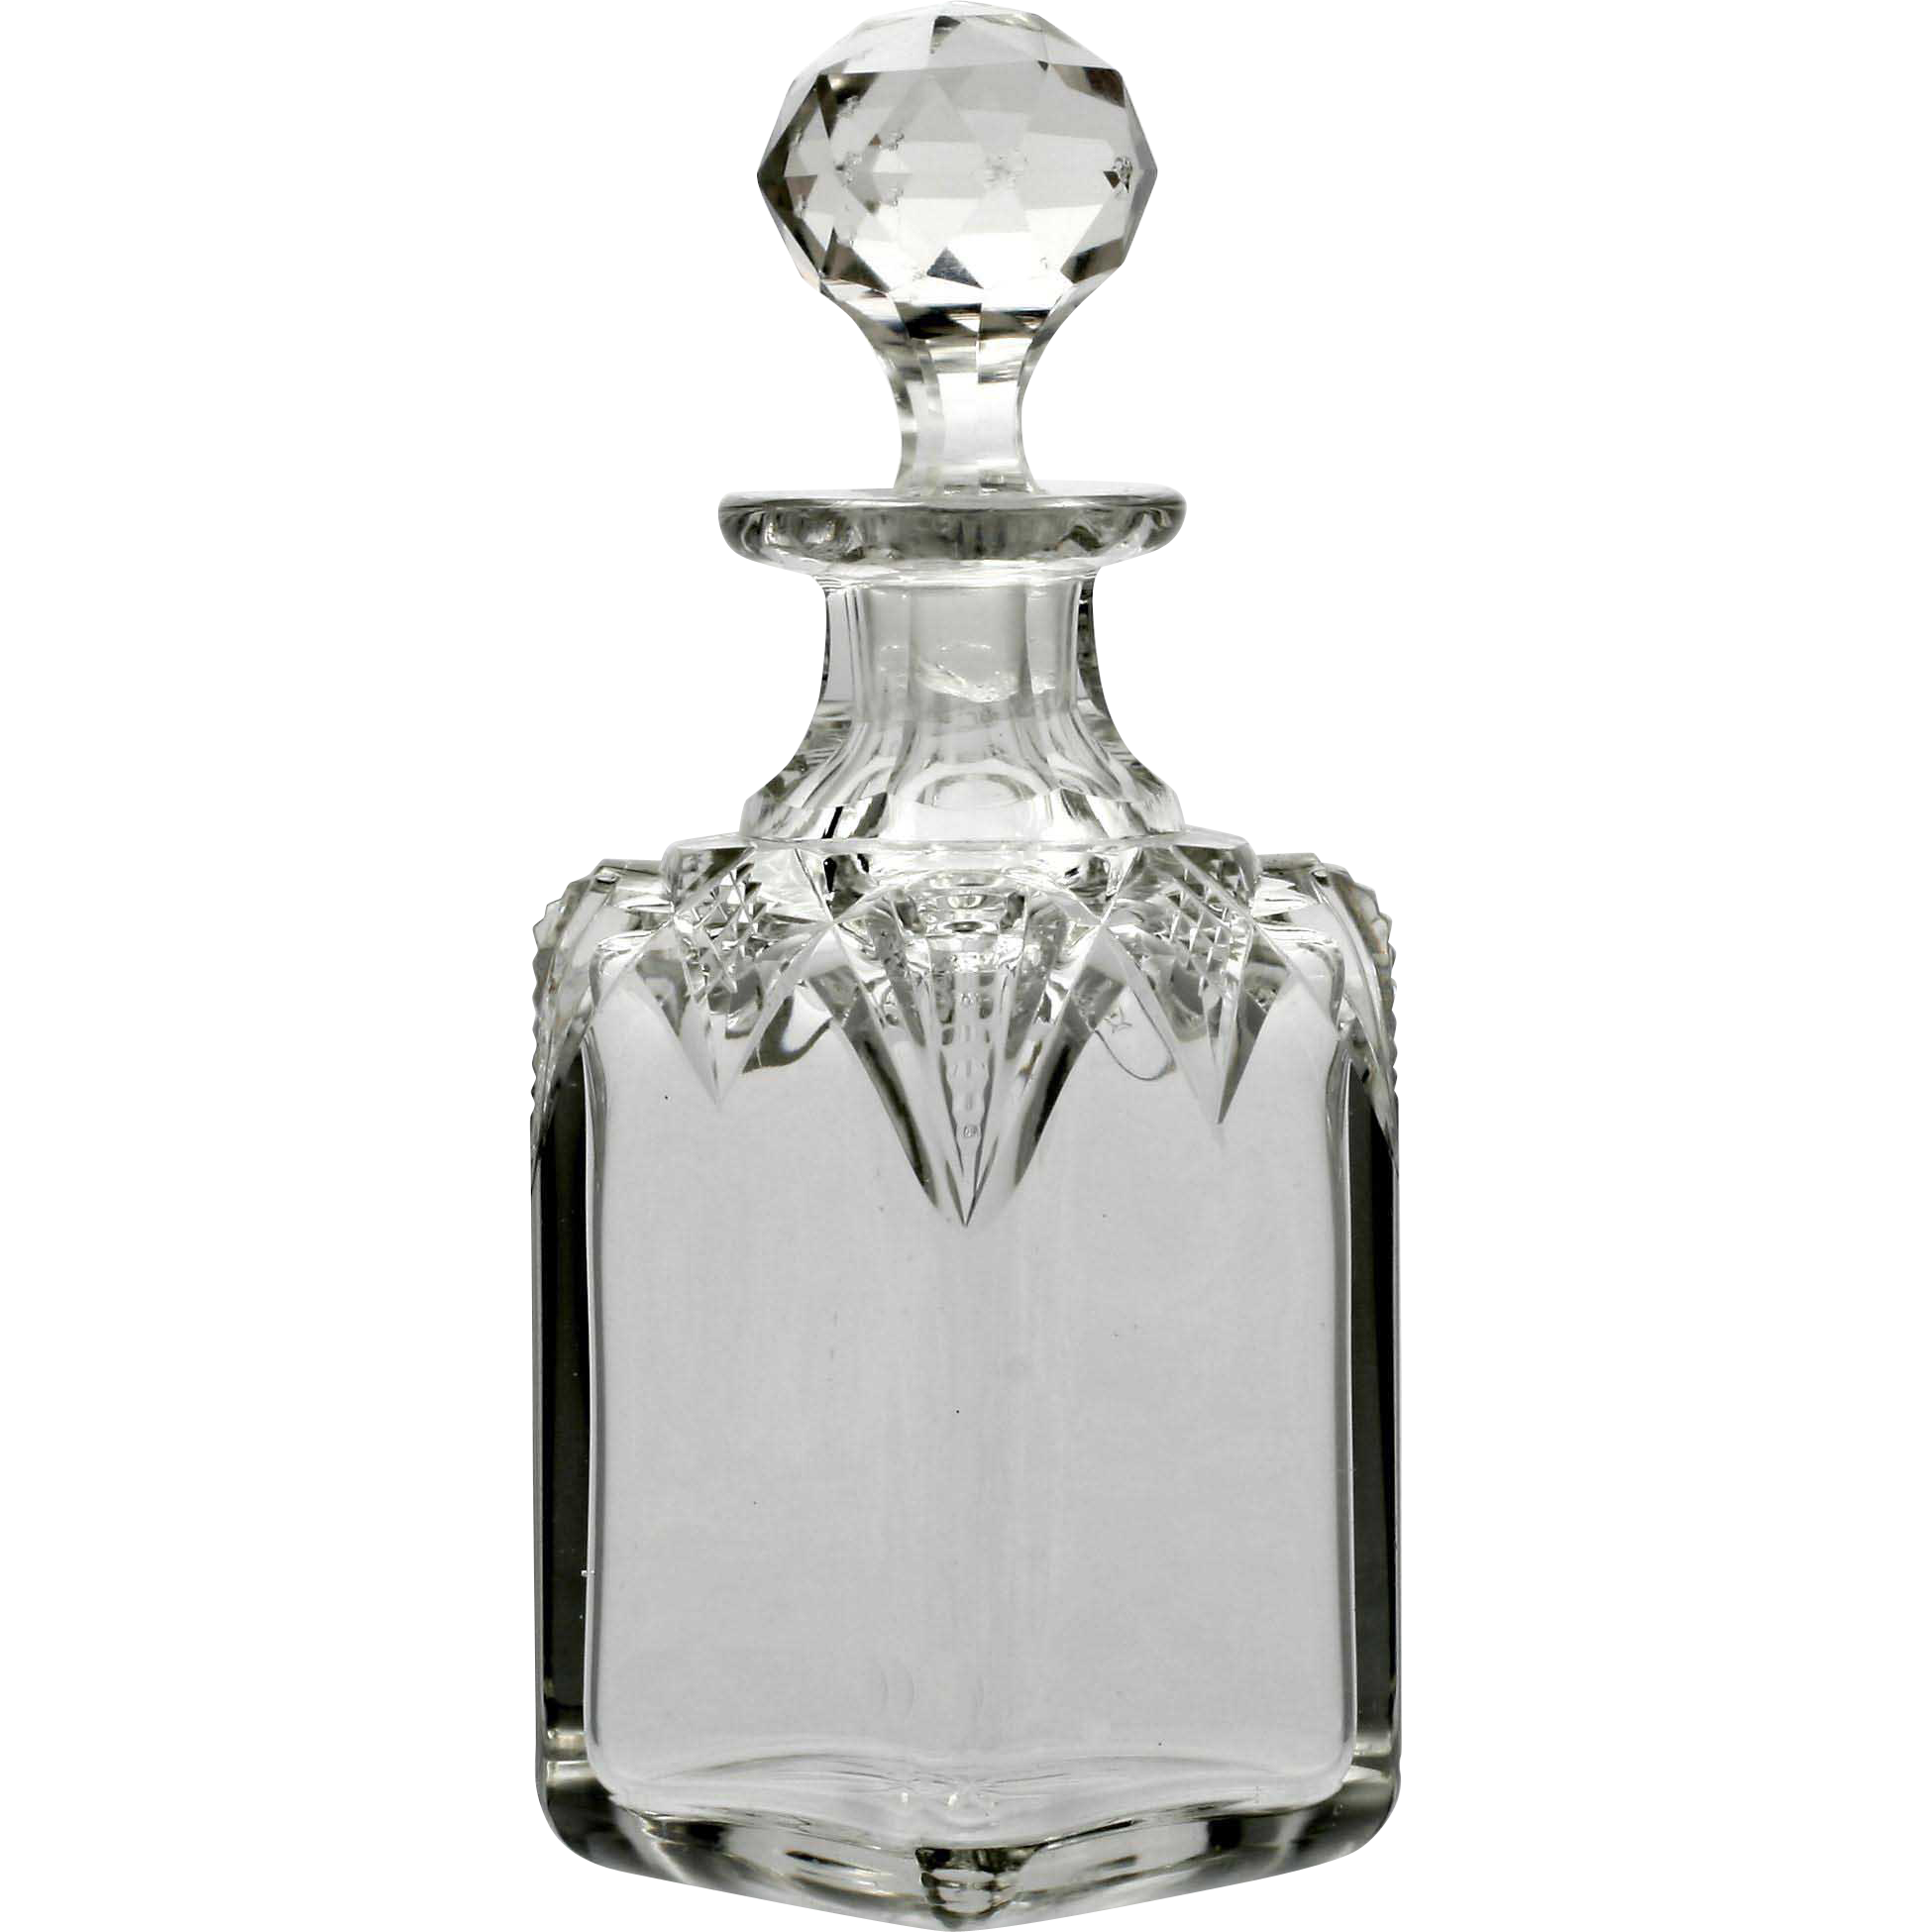 Antique Glass Images Download HD PNG Image